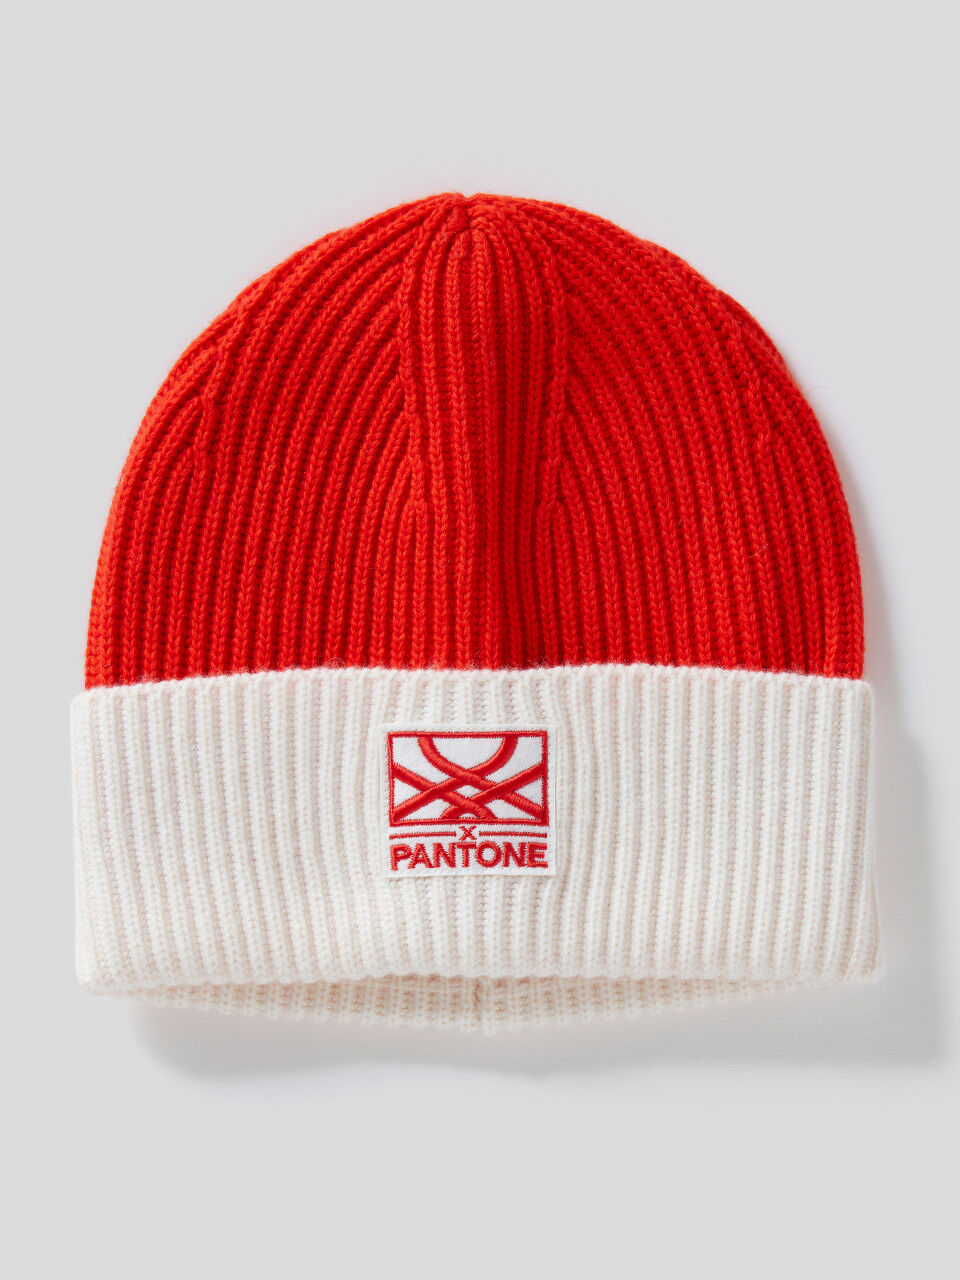 Benetton United Colors of Benetton Red 6-9 Years Beanie Hat Cheap Gift BNWT 